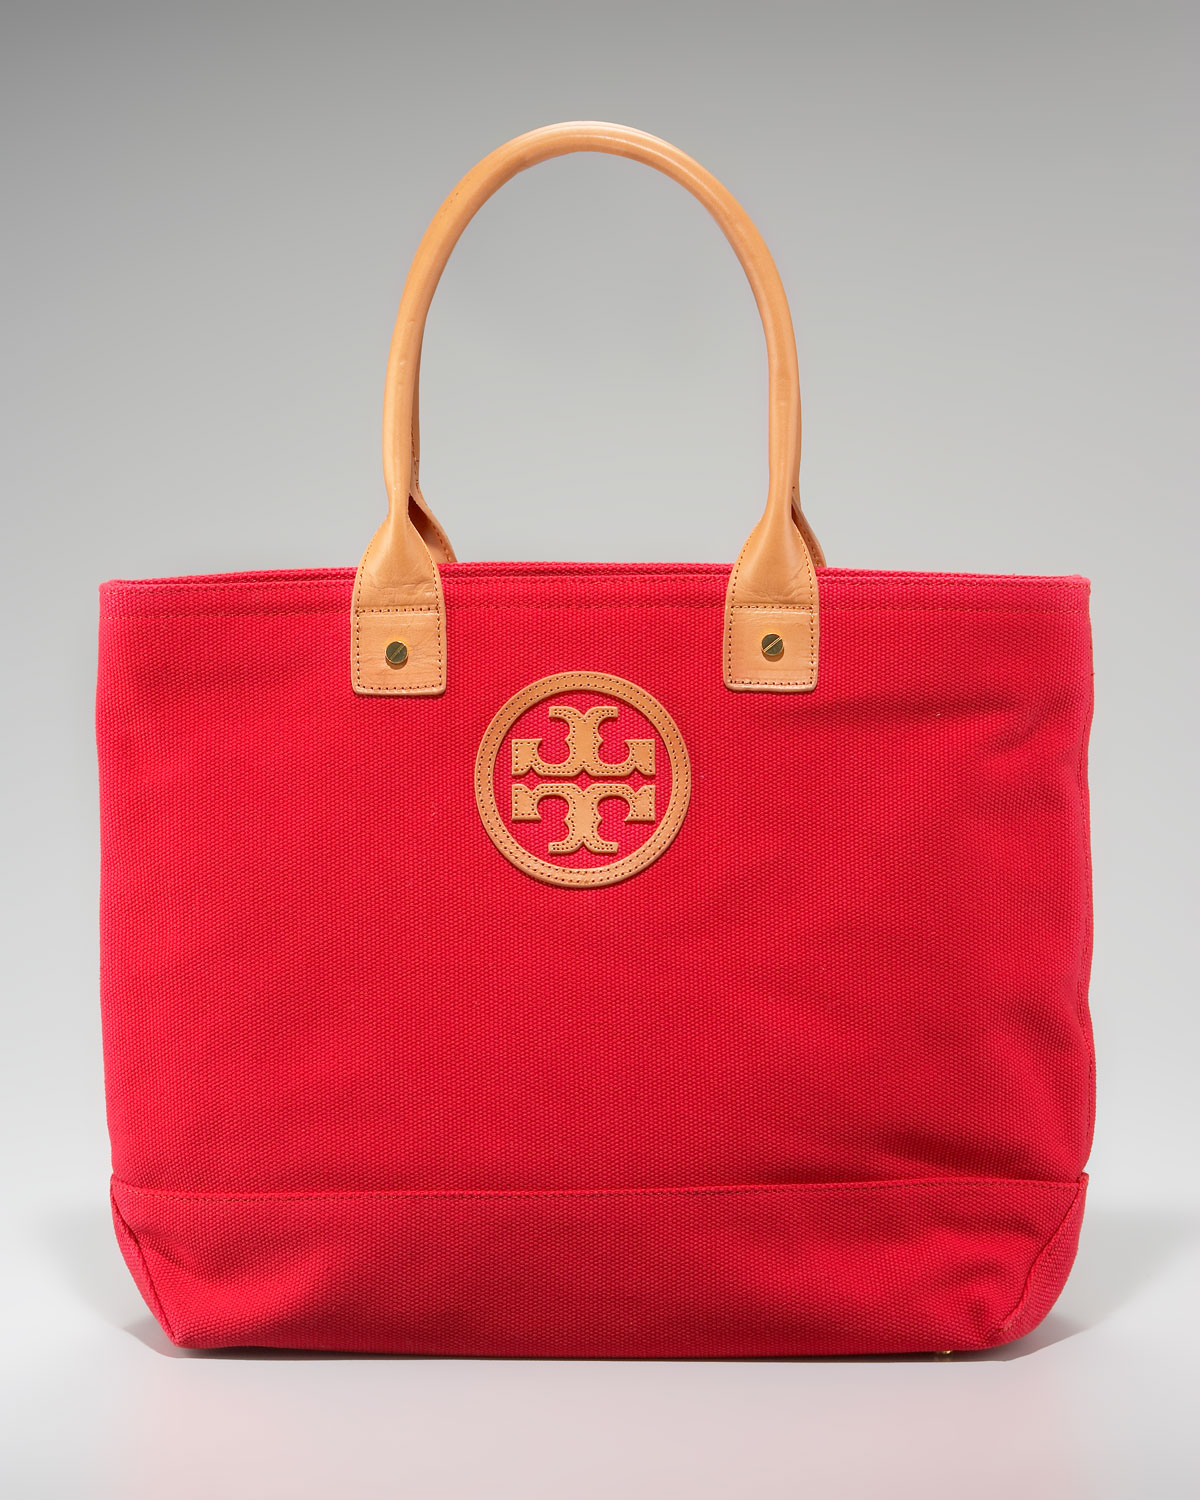 Tory Burch Canvas Jaden Tote, Small in Black - Lyst